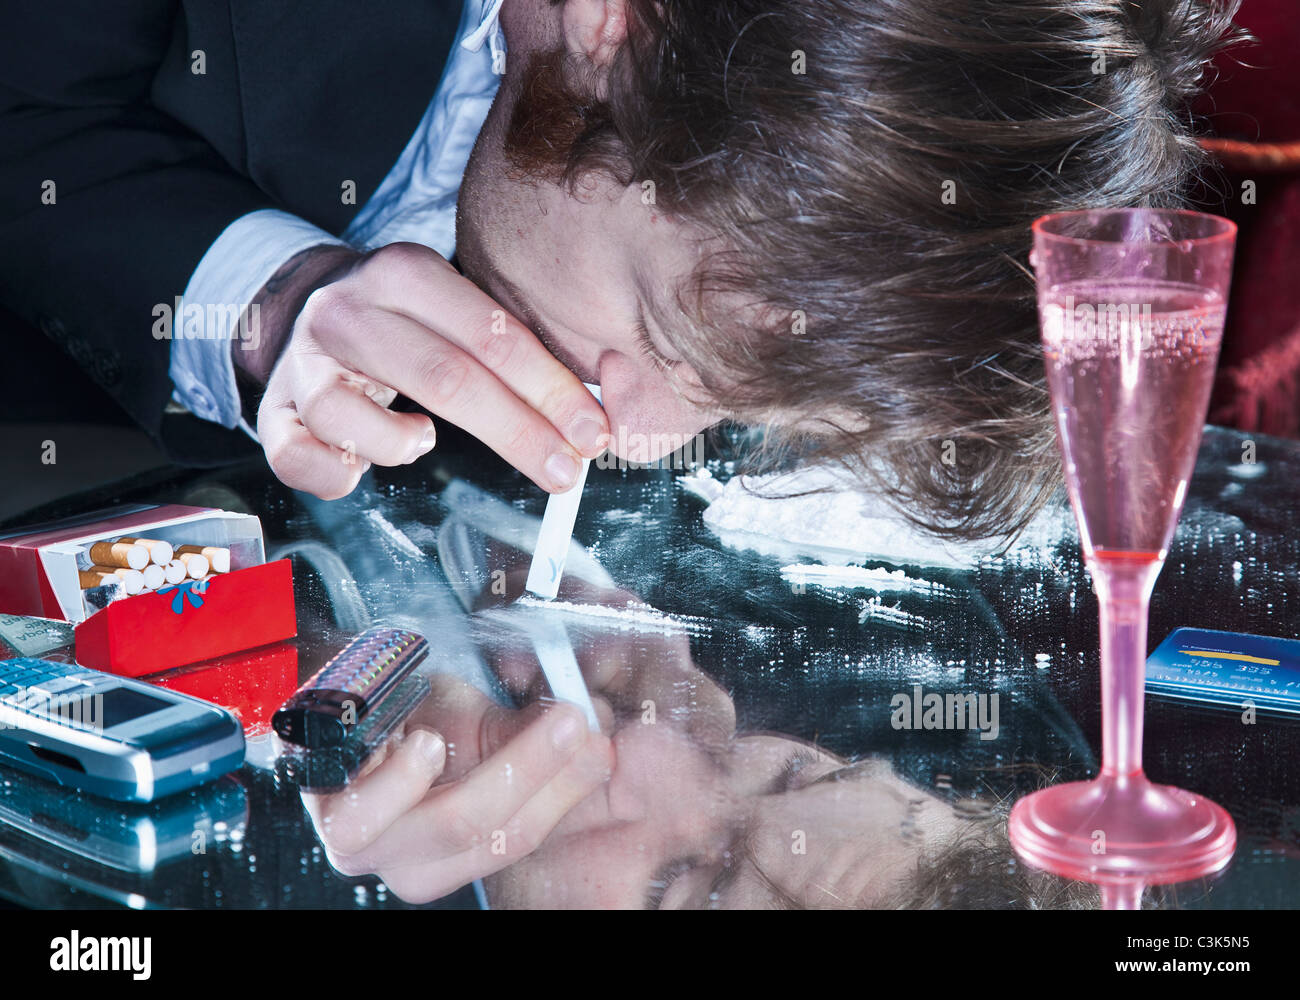 Young man sniffing cocaine Stock Photo